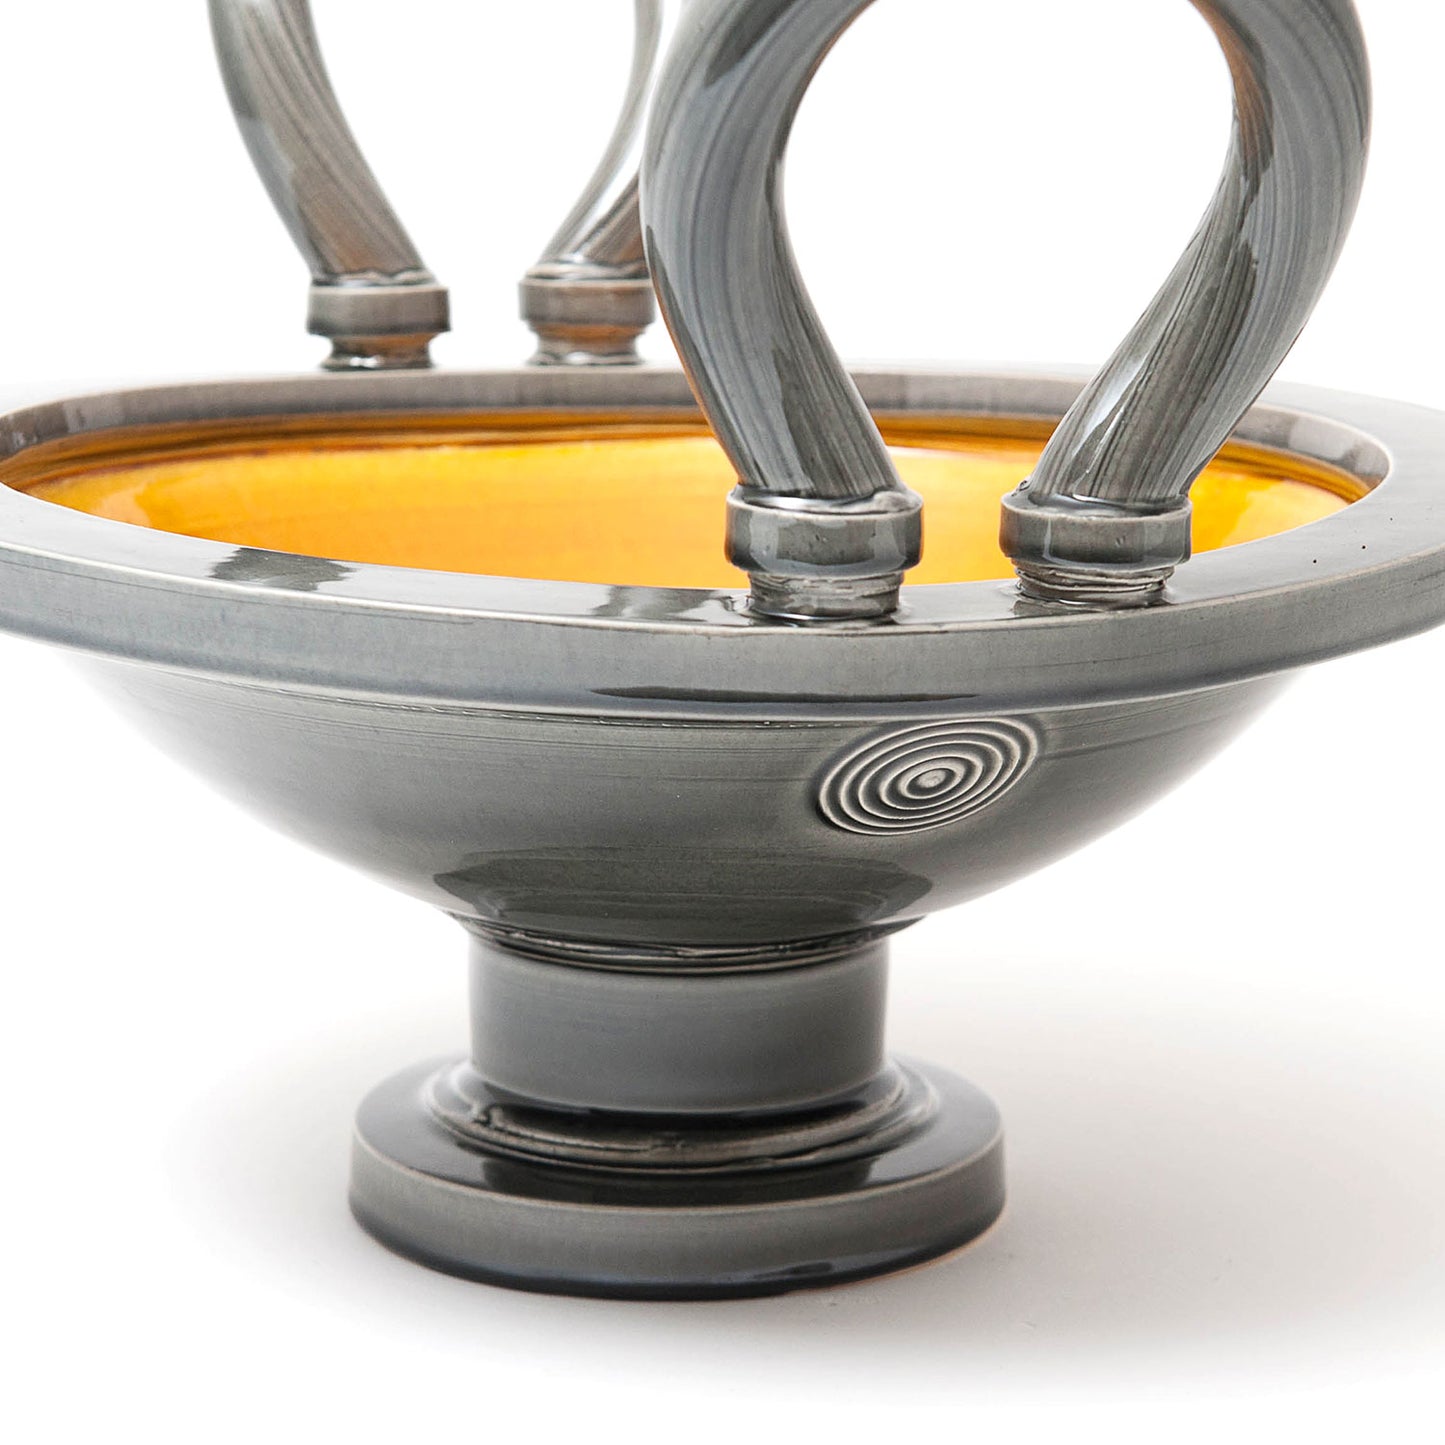 Larger Pedestal Bowl with Extruded Handles